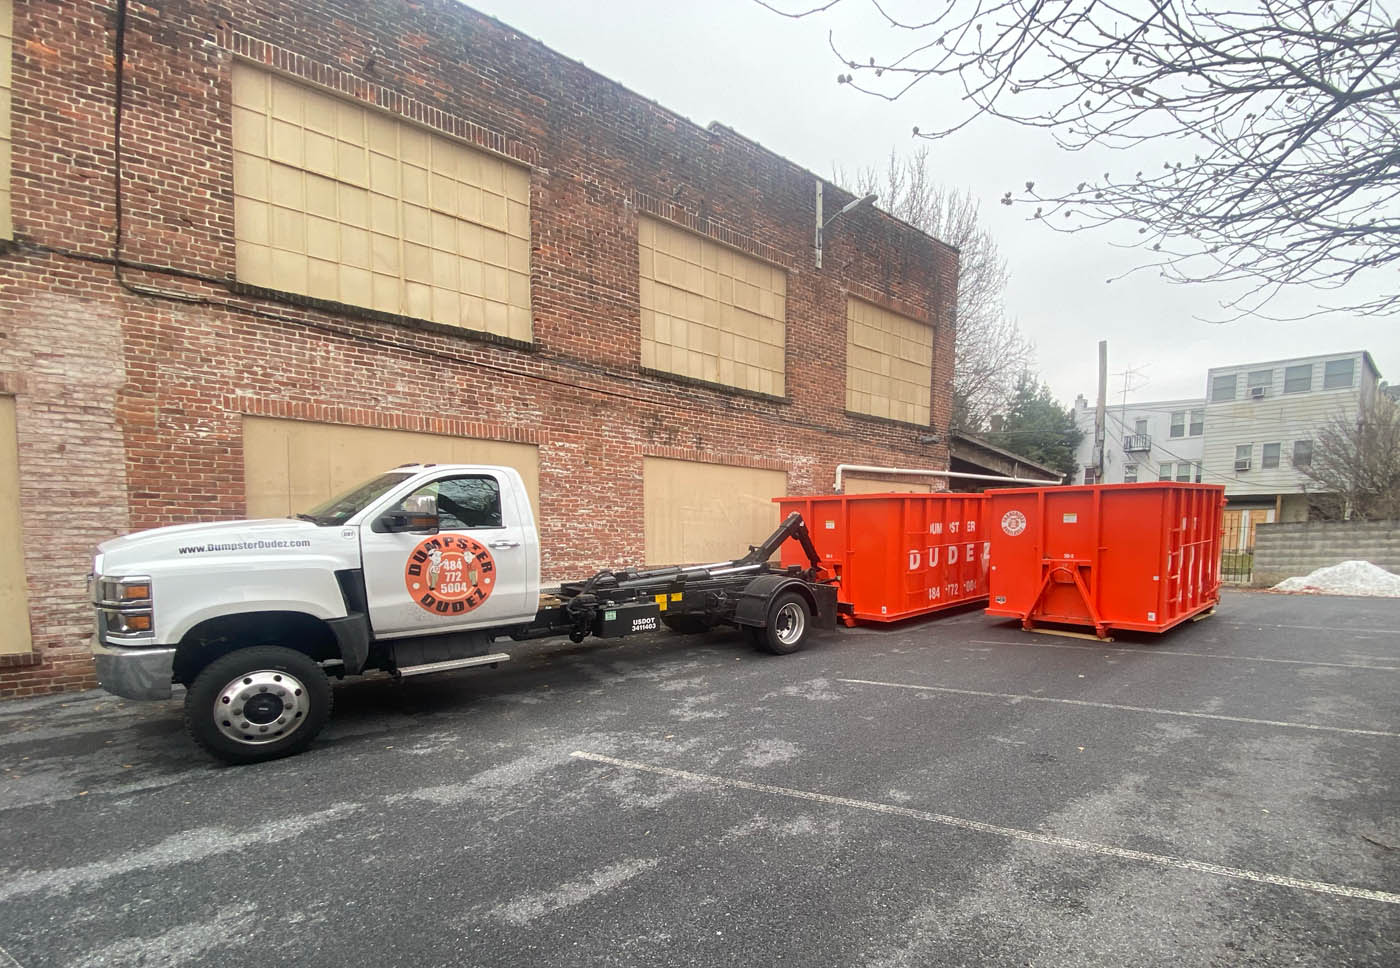 
				A small, white, 20 yard dumpster rental truck parked behind a commercial building.
			